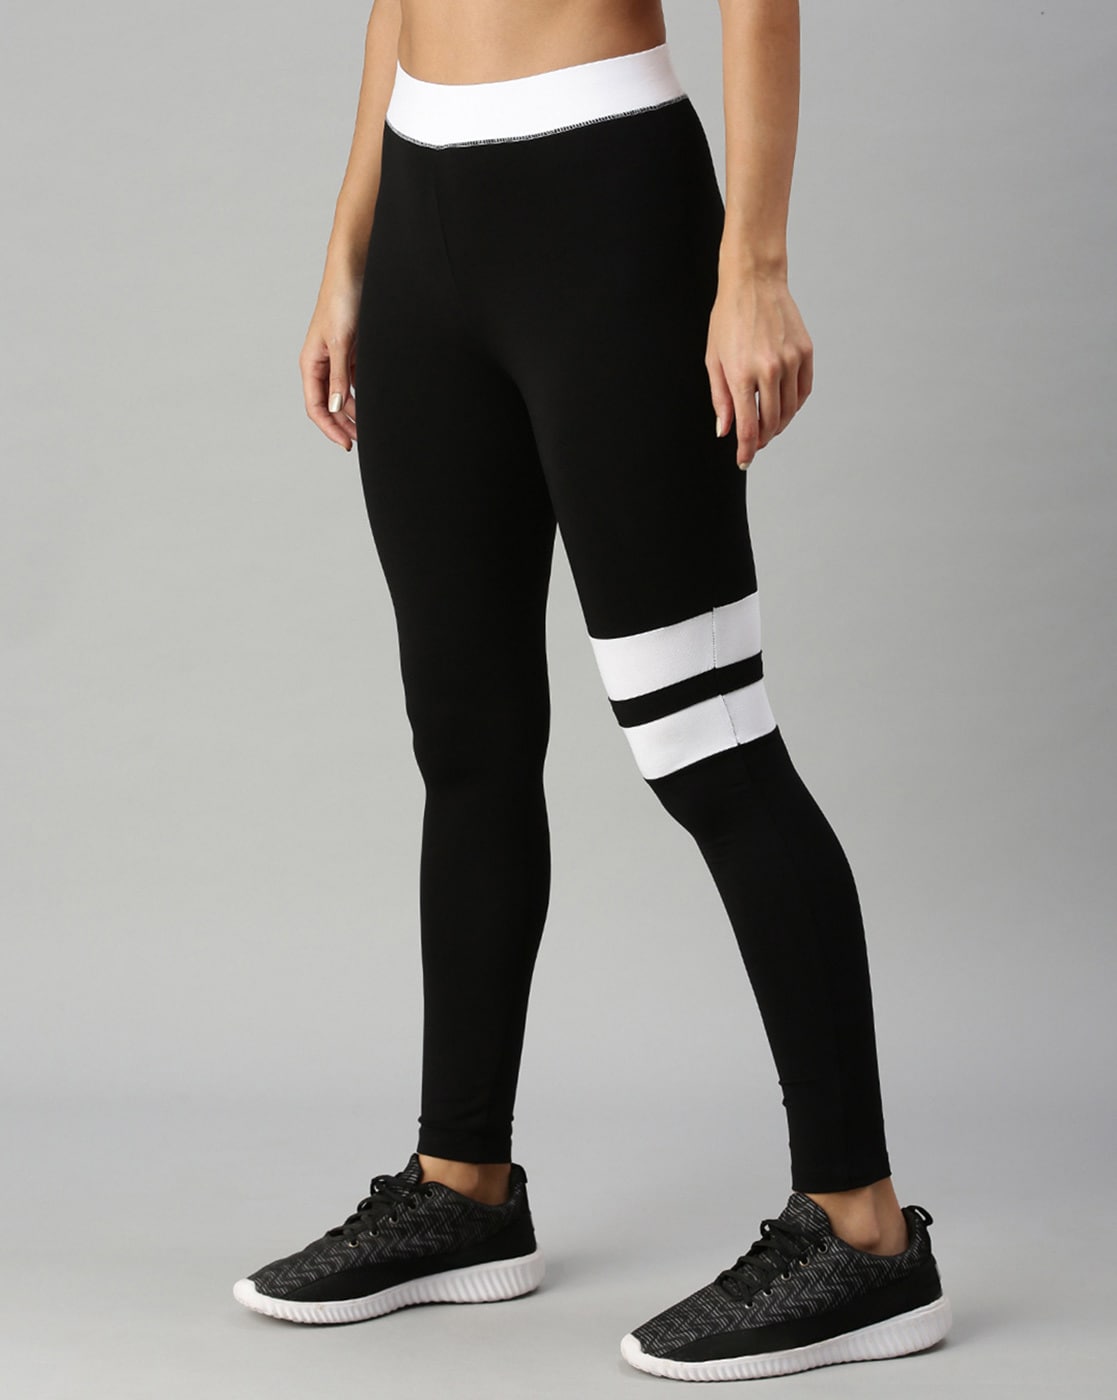 Striped Leggings in Nearly Black by Gray Label – Junior Edition